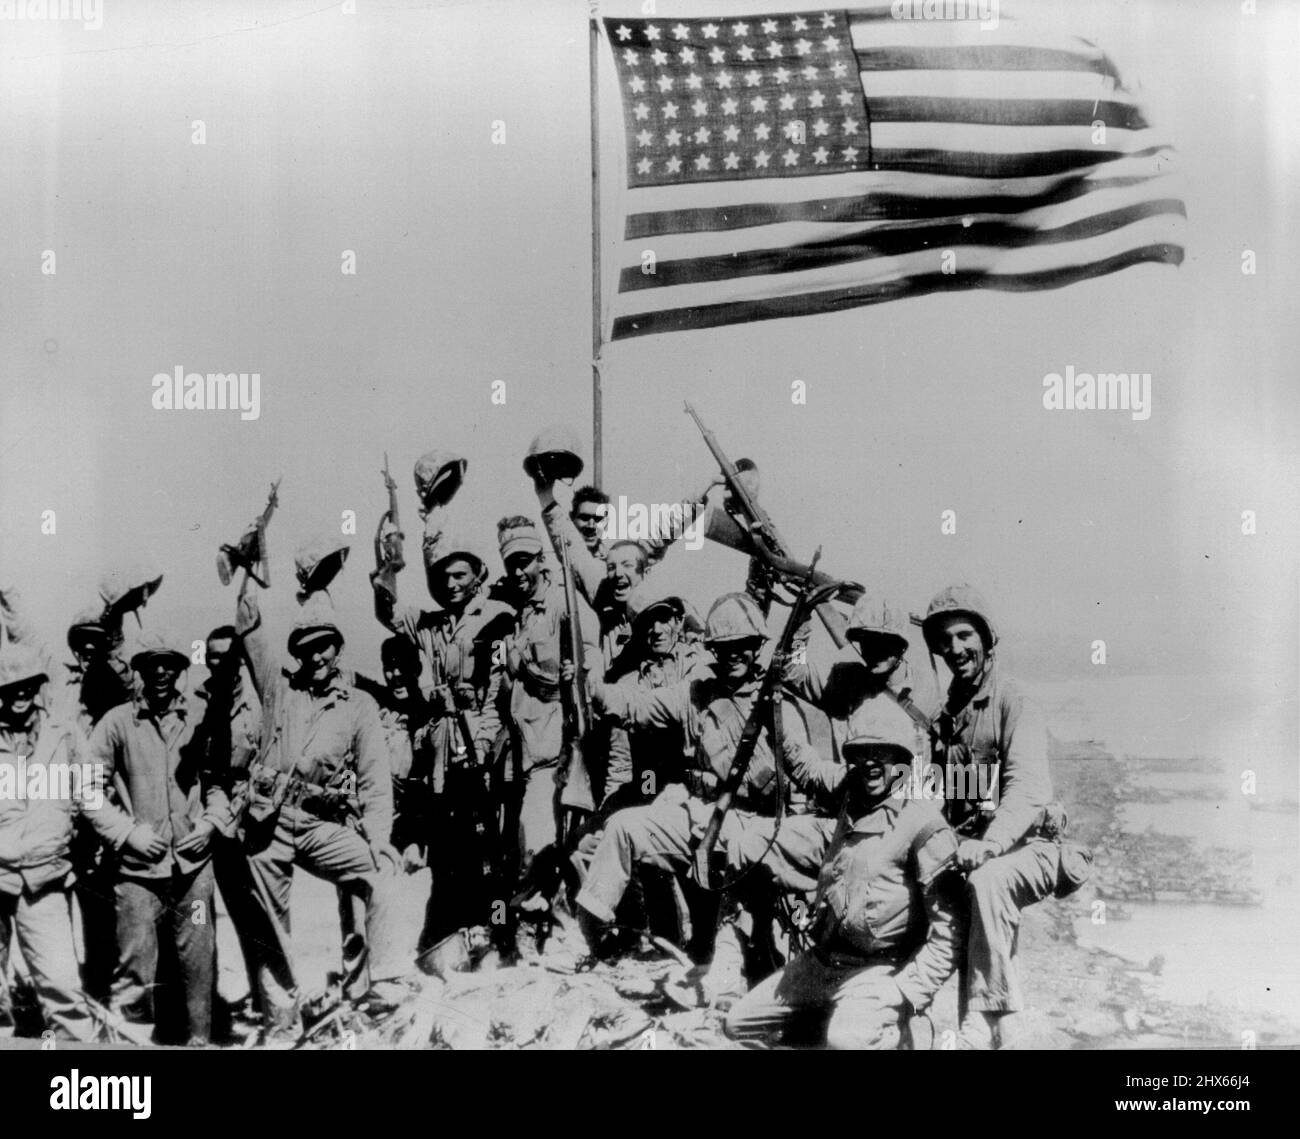 They Put U.S. Flag Atop Suribachi - Marines of the 28th Regiment, 5th Division, wave from in front of the American flag they put atop Suribachi, Iwo Jima’s volcano, after a bitter uphill battle with the Japanese in caves and pillboxes on Iwo Jima’s natural fort. February 27, 1945. (Photo by Joe Rosenthal, AP). Stock Photo